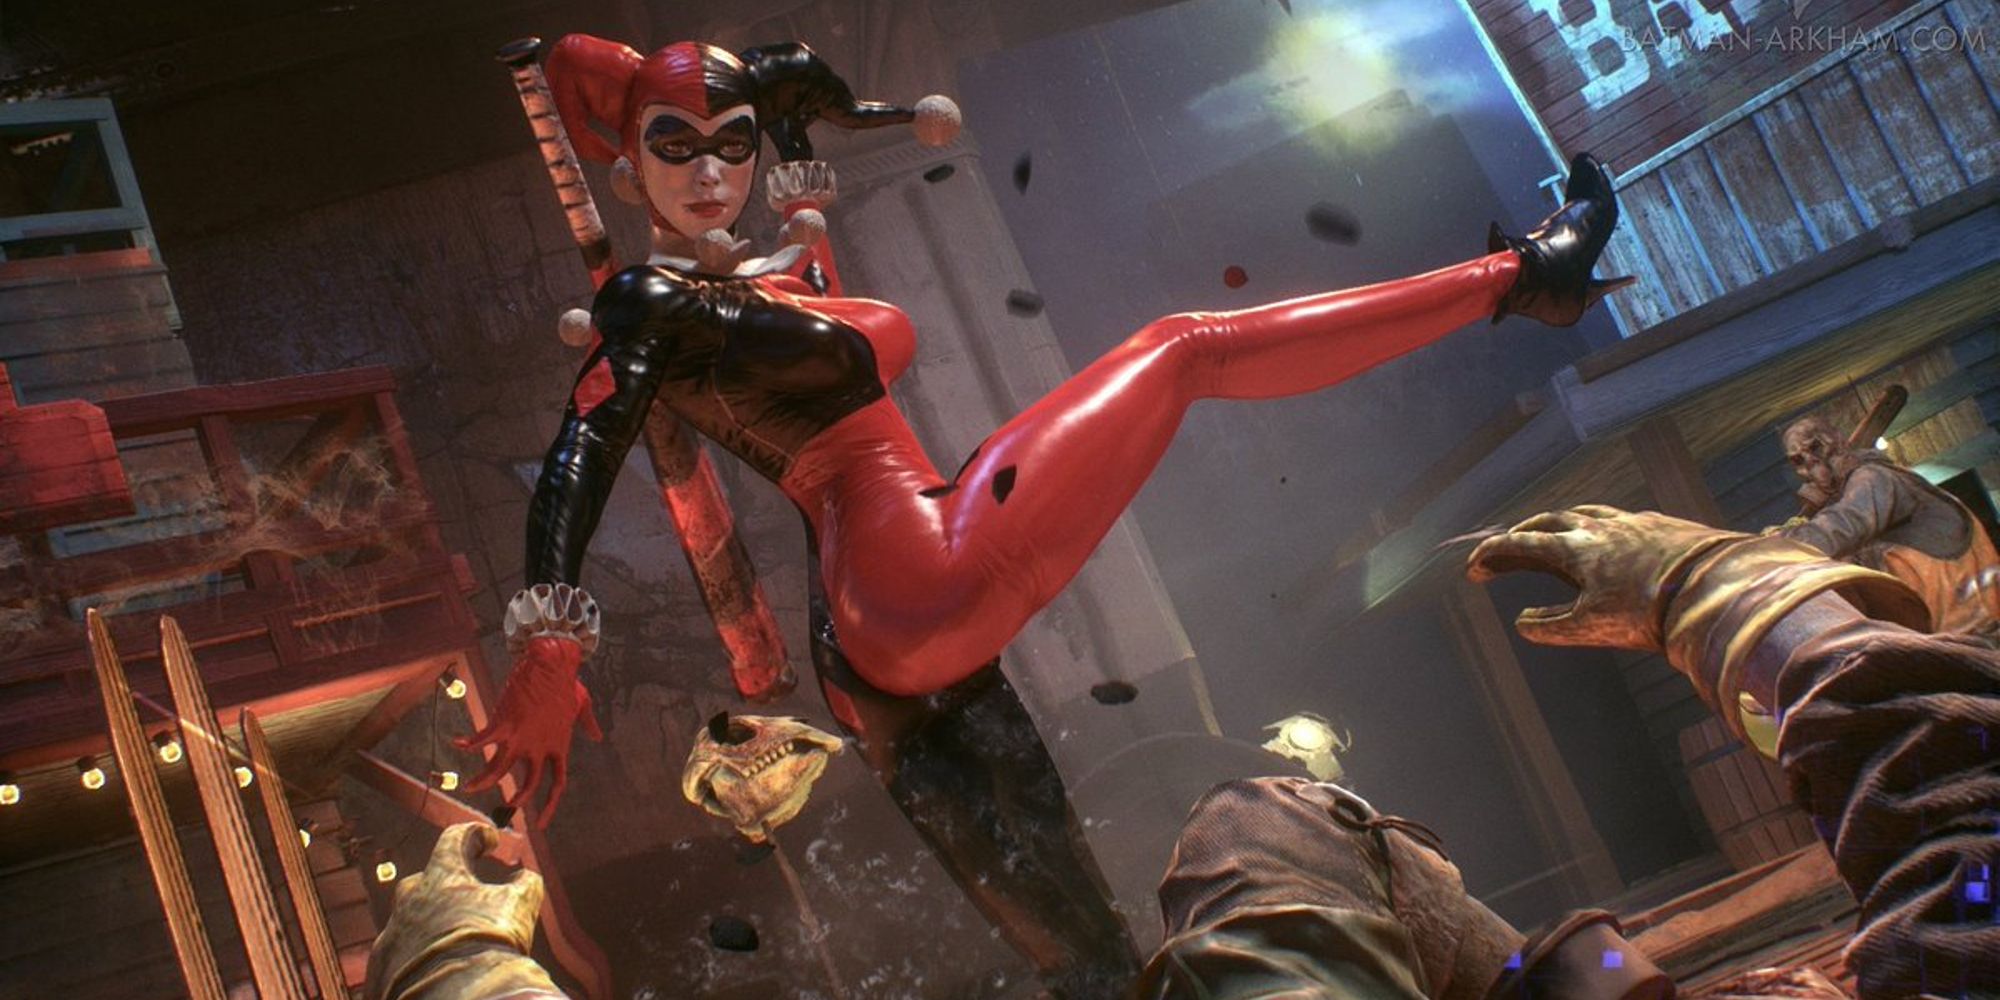 Harley Quinn in her classic suit fighting in the movie studios in Batman Arkham Knight (2015)